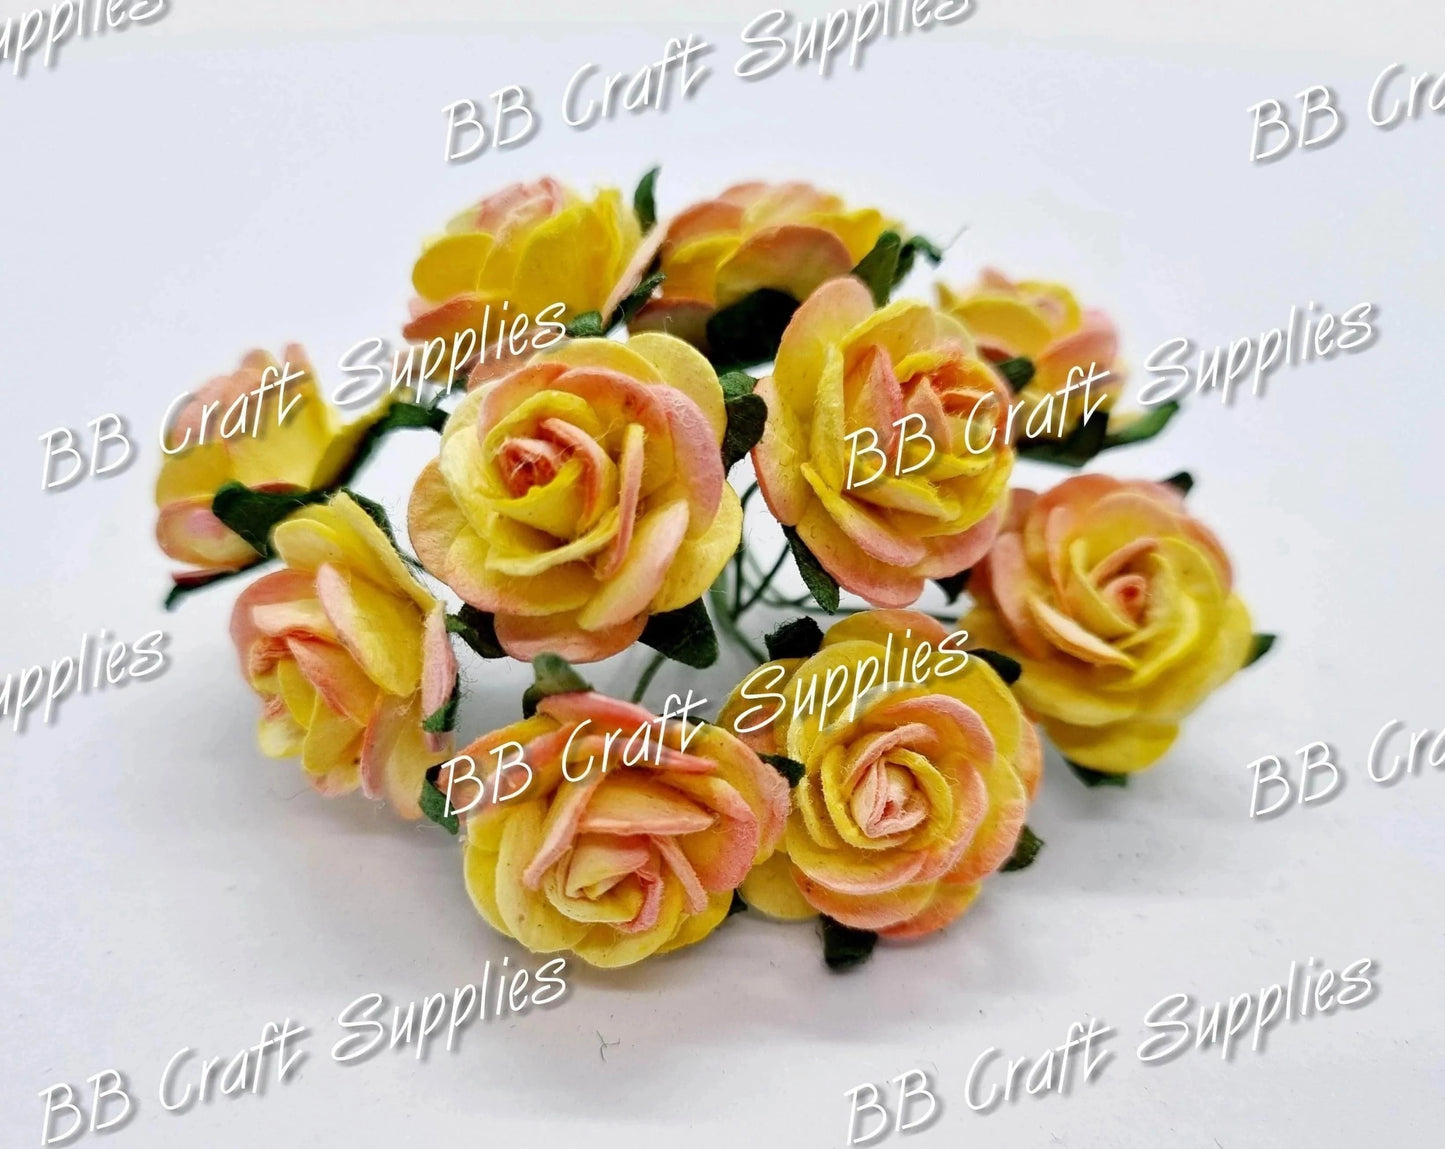 Mini Roses Yellow/Pink tips 10 Pack - Embelishment, Flower, mini, Mulburry, mullberry, pink, rose, yellow - Bare Butler Faux Leather Supplies 